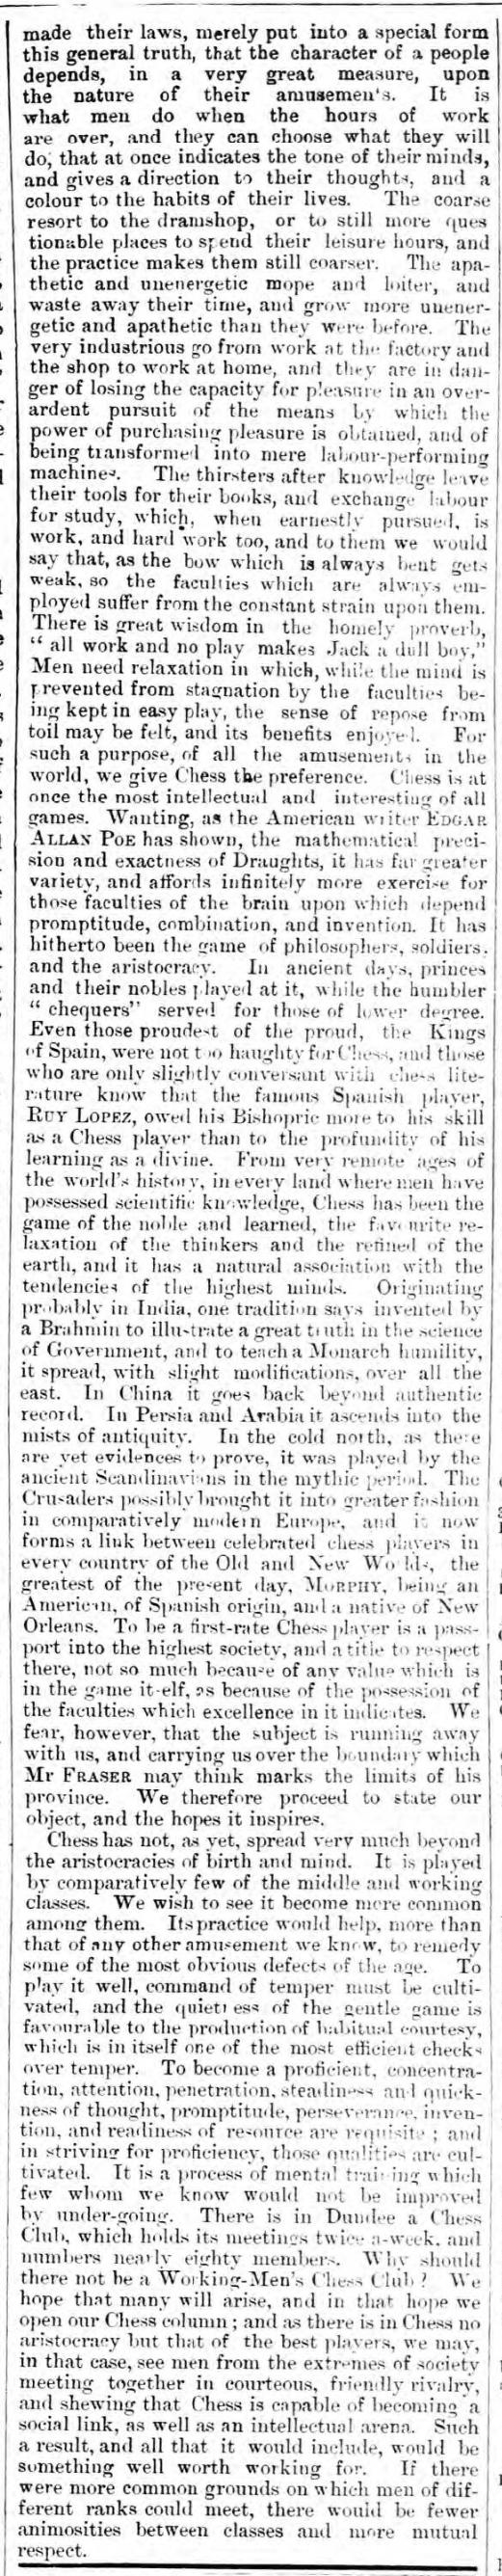 1862.07.05-02 Dundee Courier and Argus.jpg